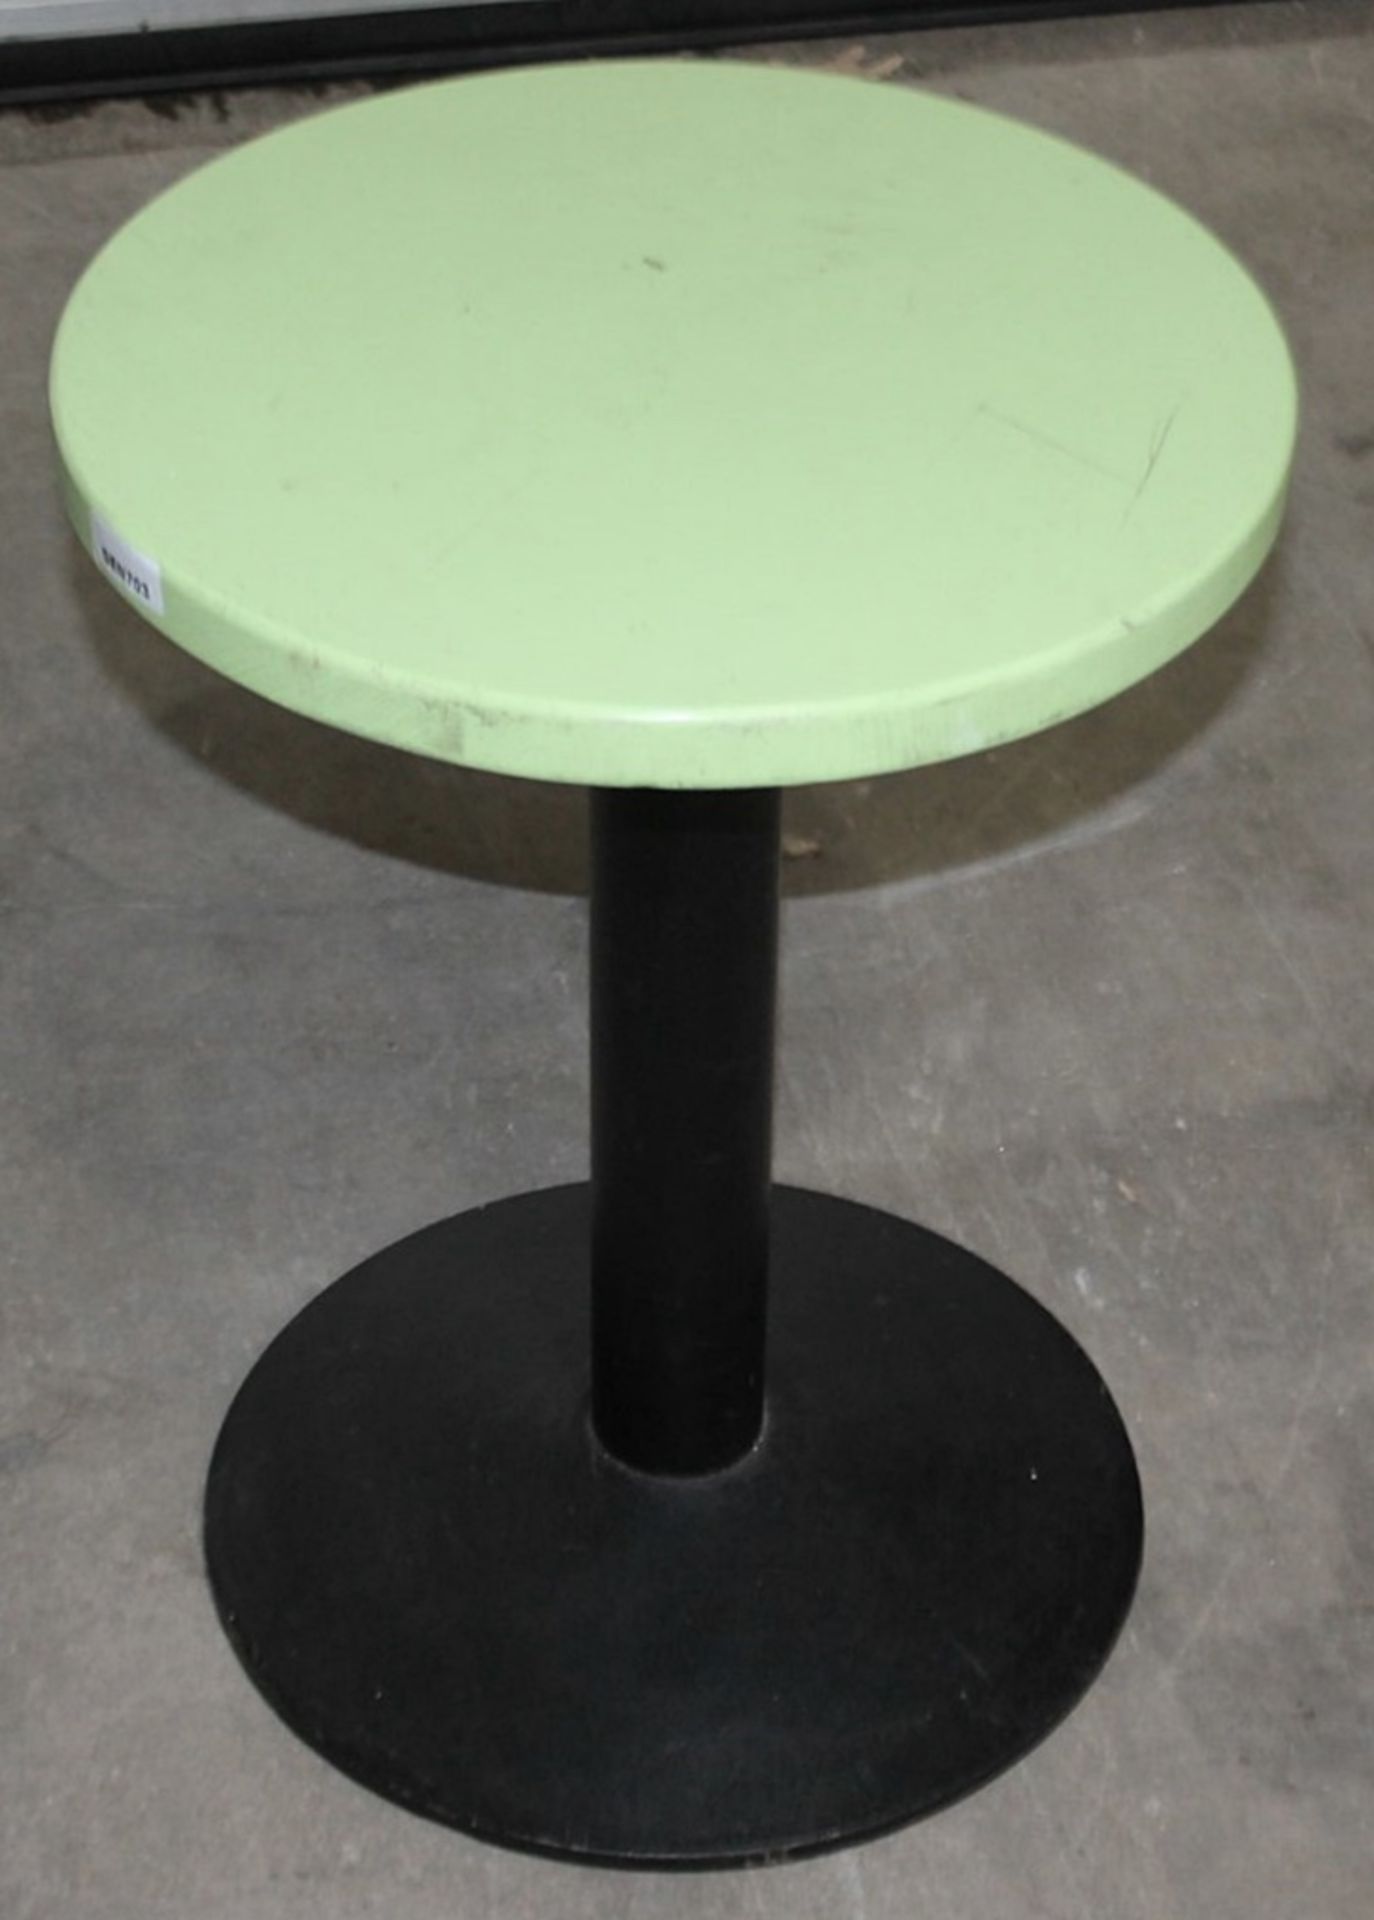 1 x Rustic Low Profile Bespoke Bar Table With A Lime Green Paineted Top - Dimensions: H61 x